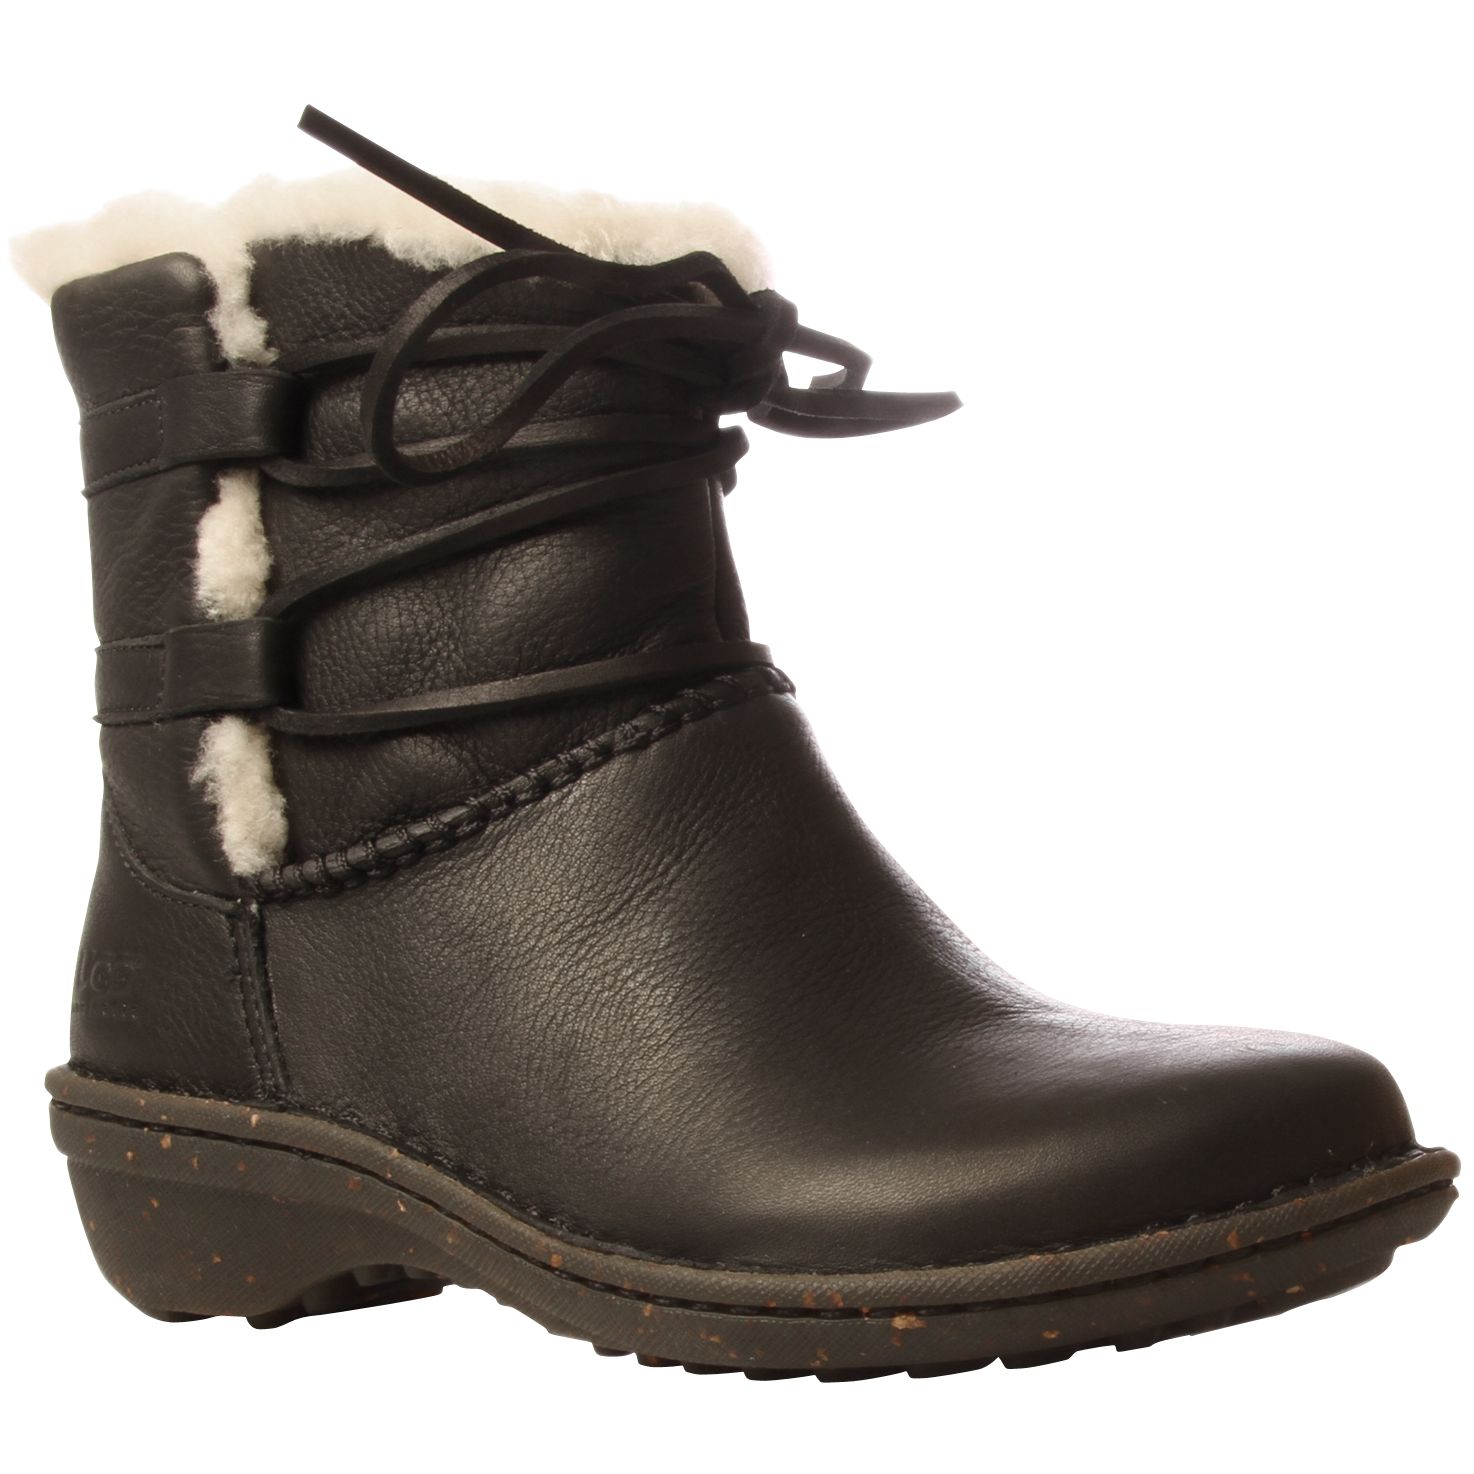 Ugg Caspia Ankle Boots, Black at John Lewis